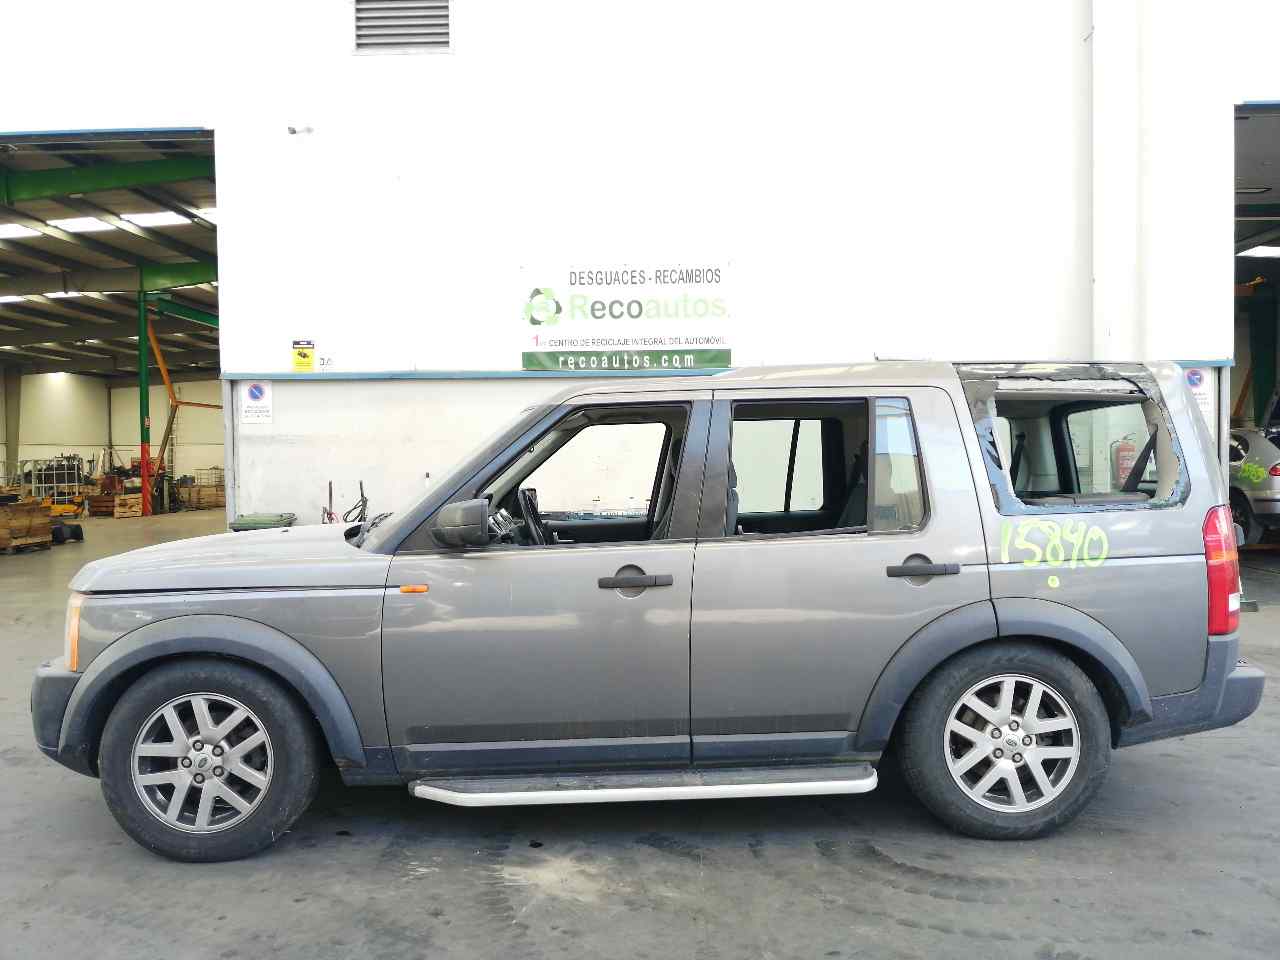 LAND ROVER Discovery 4 generation (2009-2016) Части моторного отсека KKB500441G, 3618398125 19826370